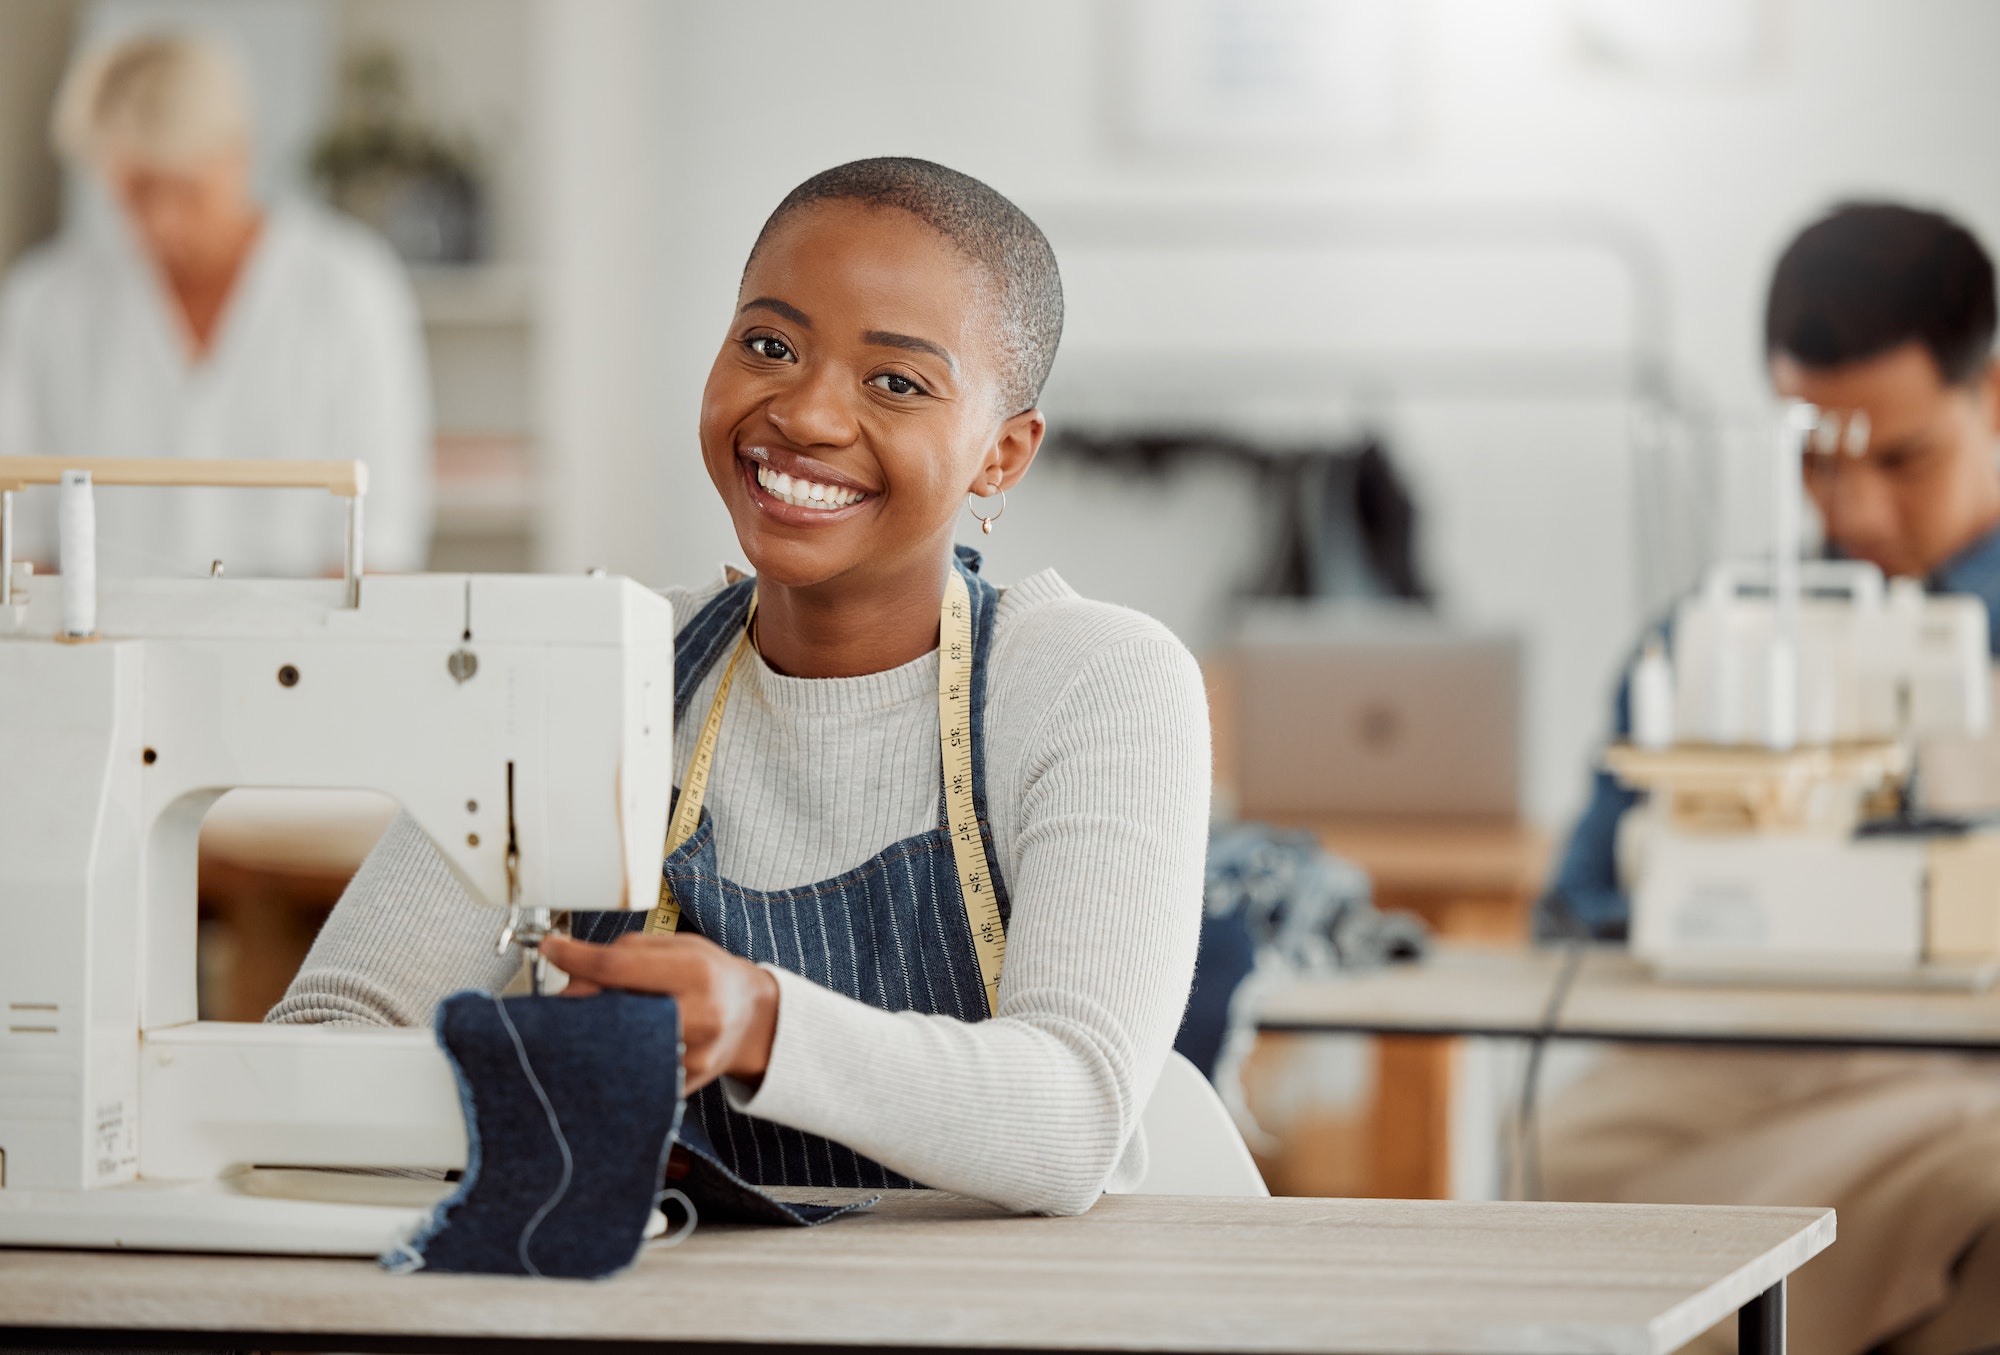 Happy, creative black fashion student or designer sitting and smiling in class by a sewing machine